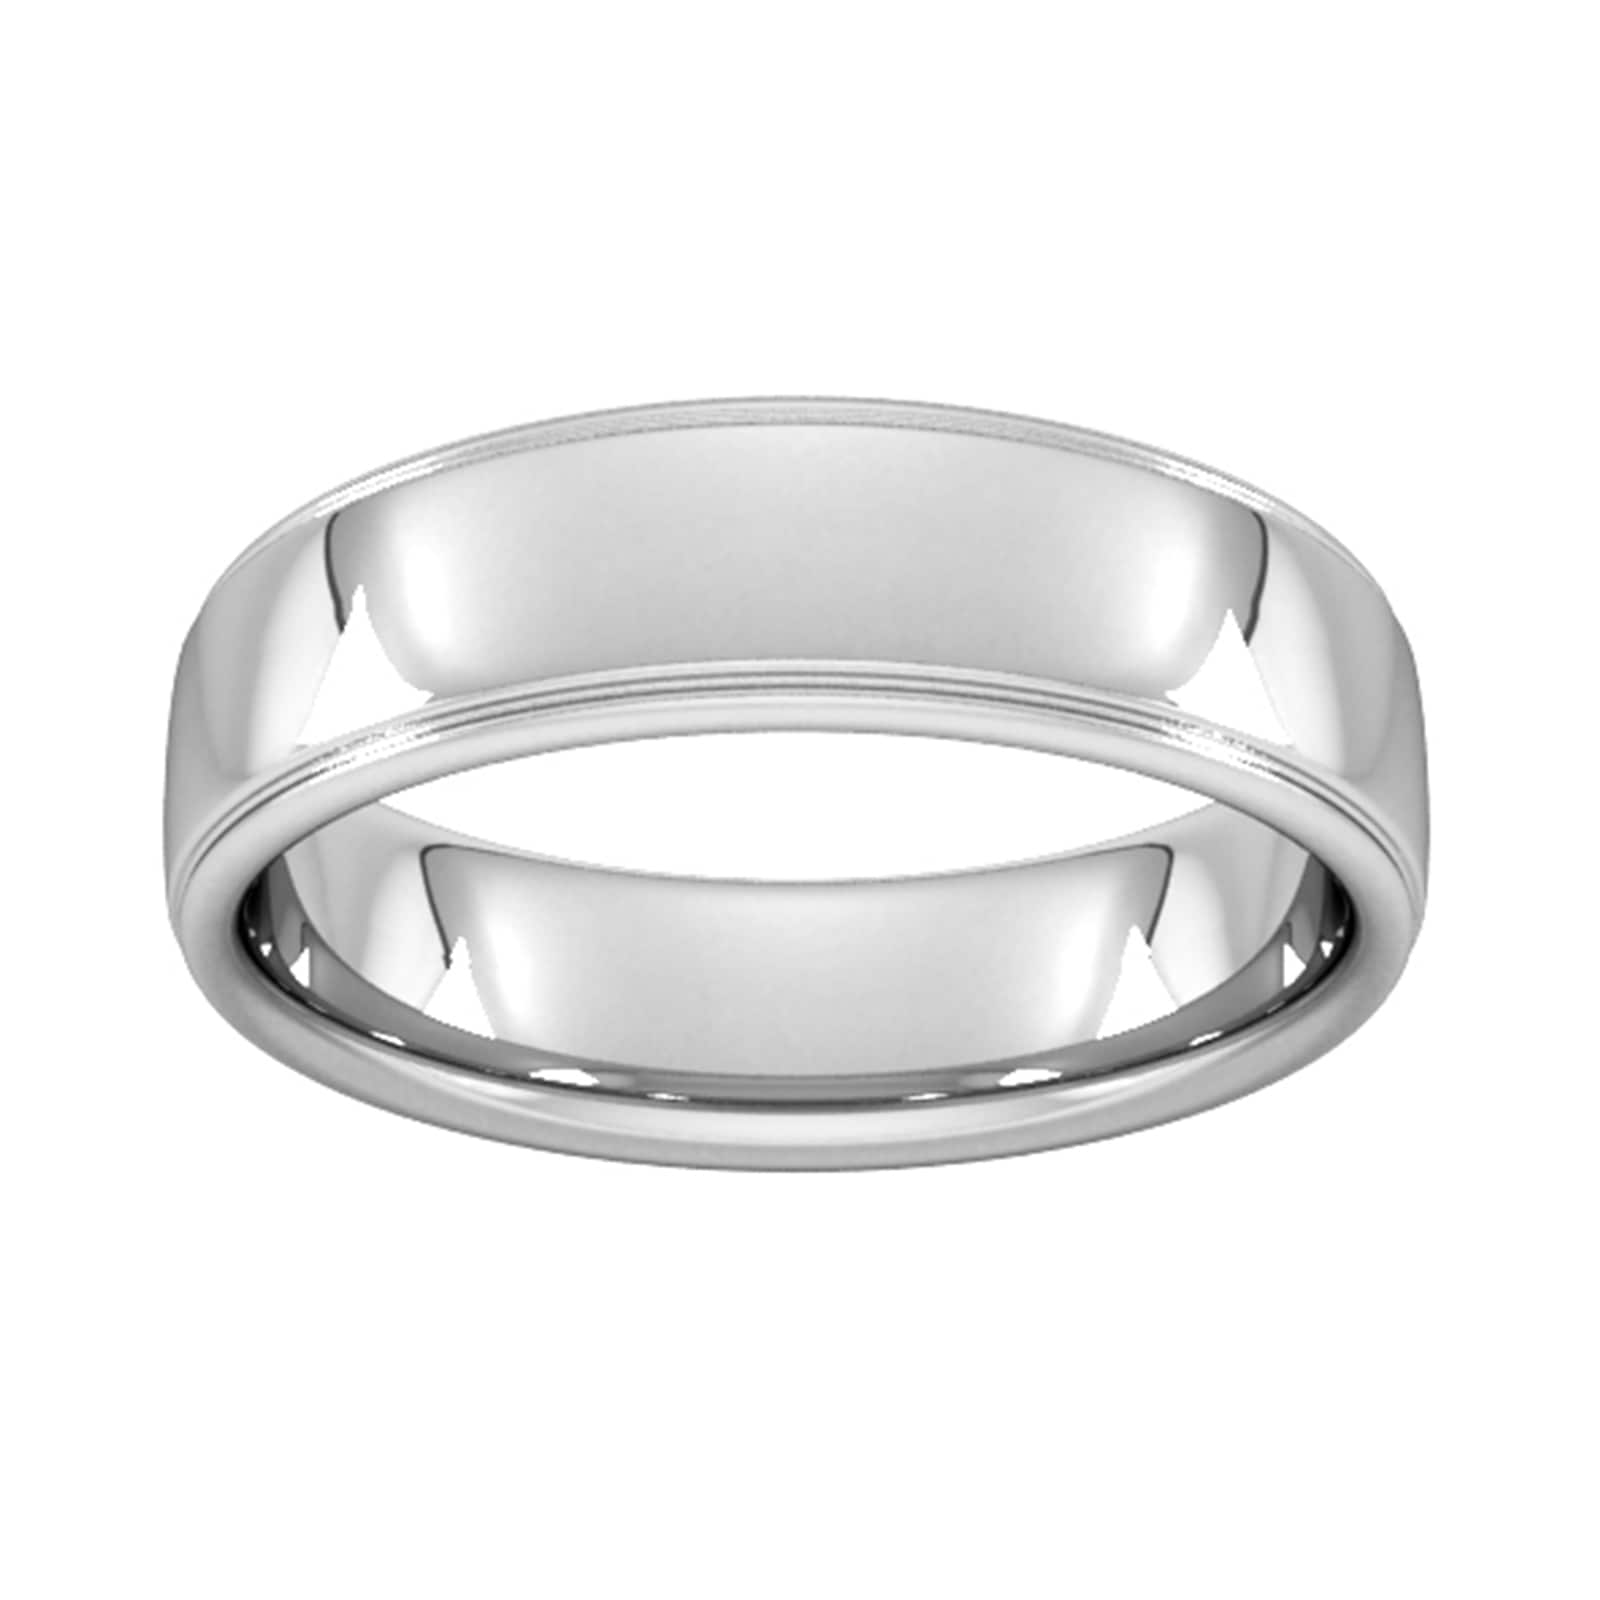 6mm Slight Court Standard Polished Finish With Grooves Wedding Ring In 9 Carat White Gold - Ring Size K